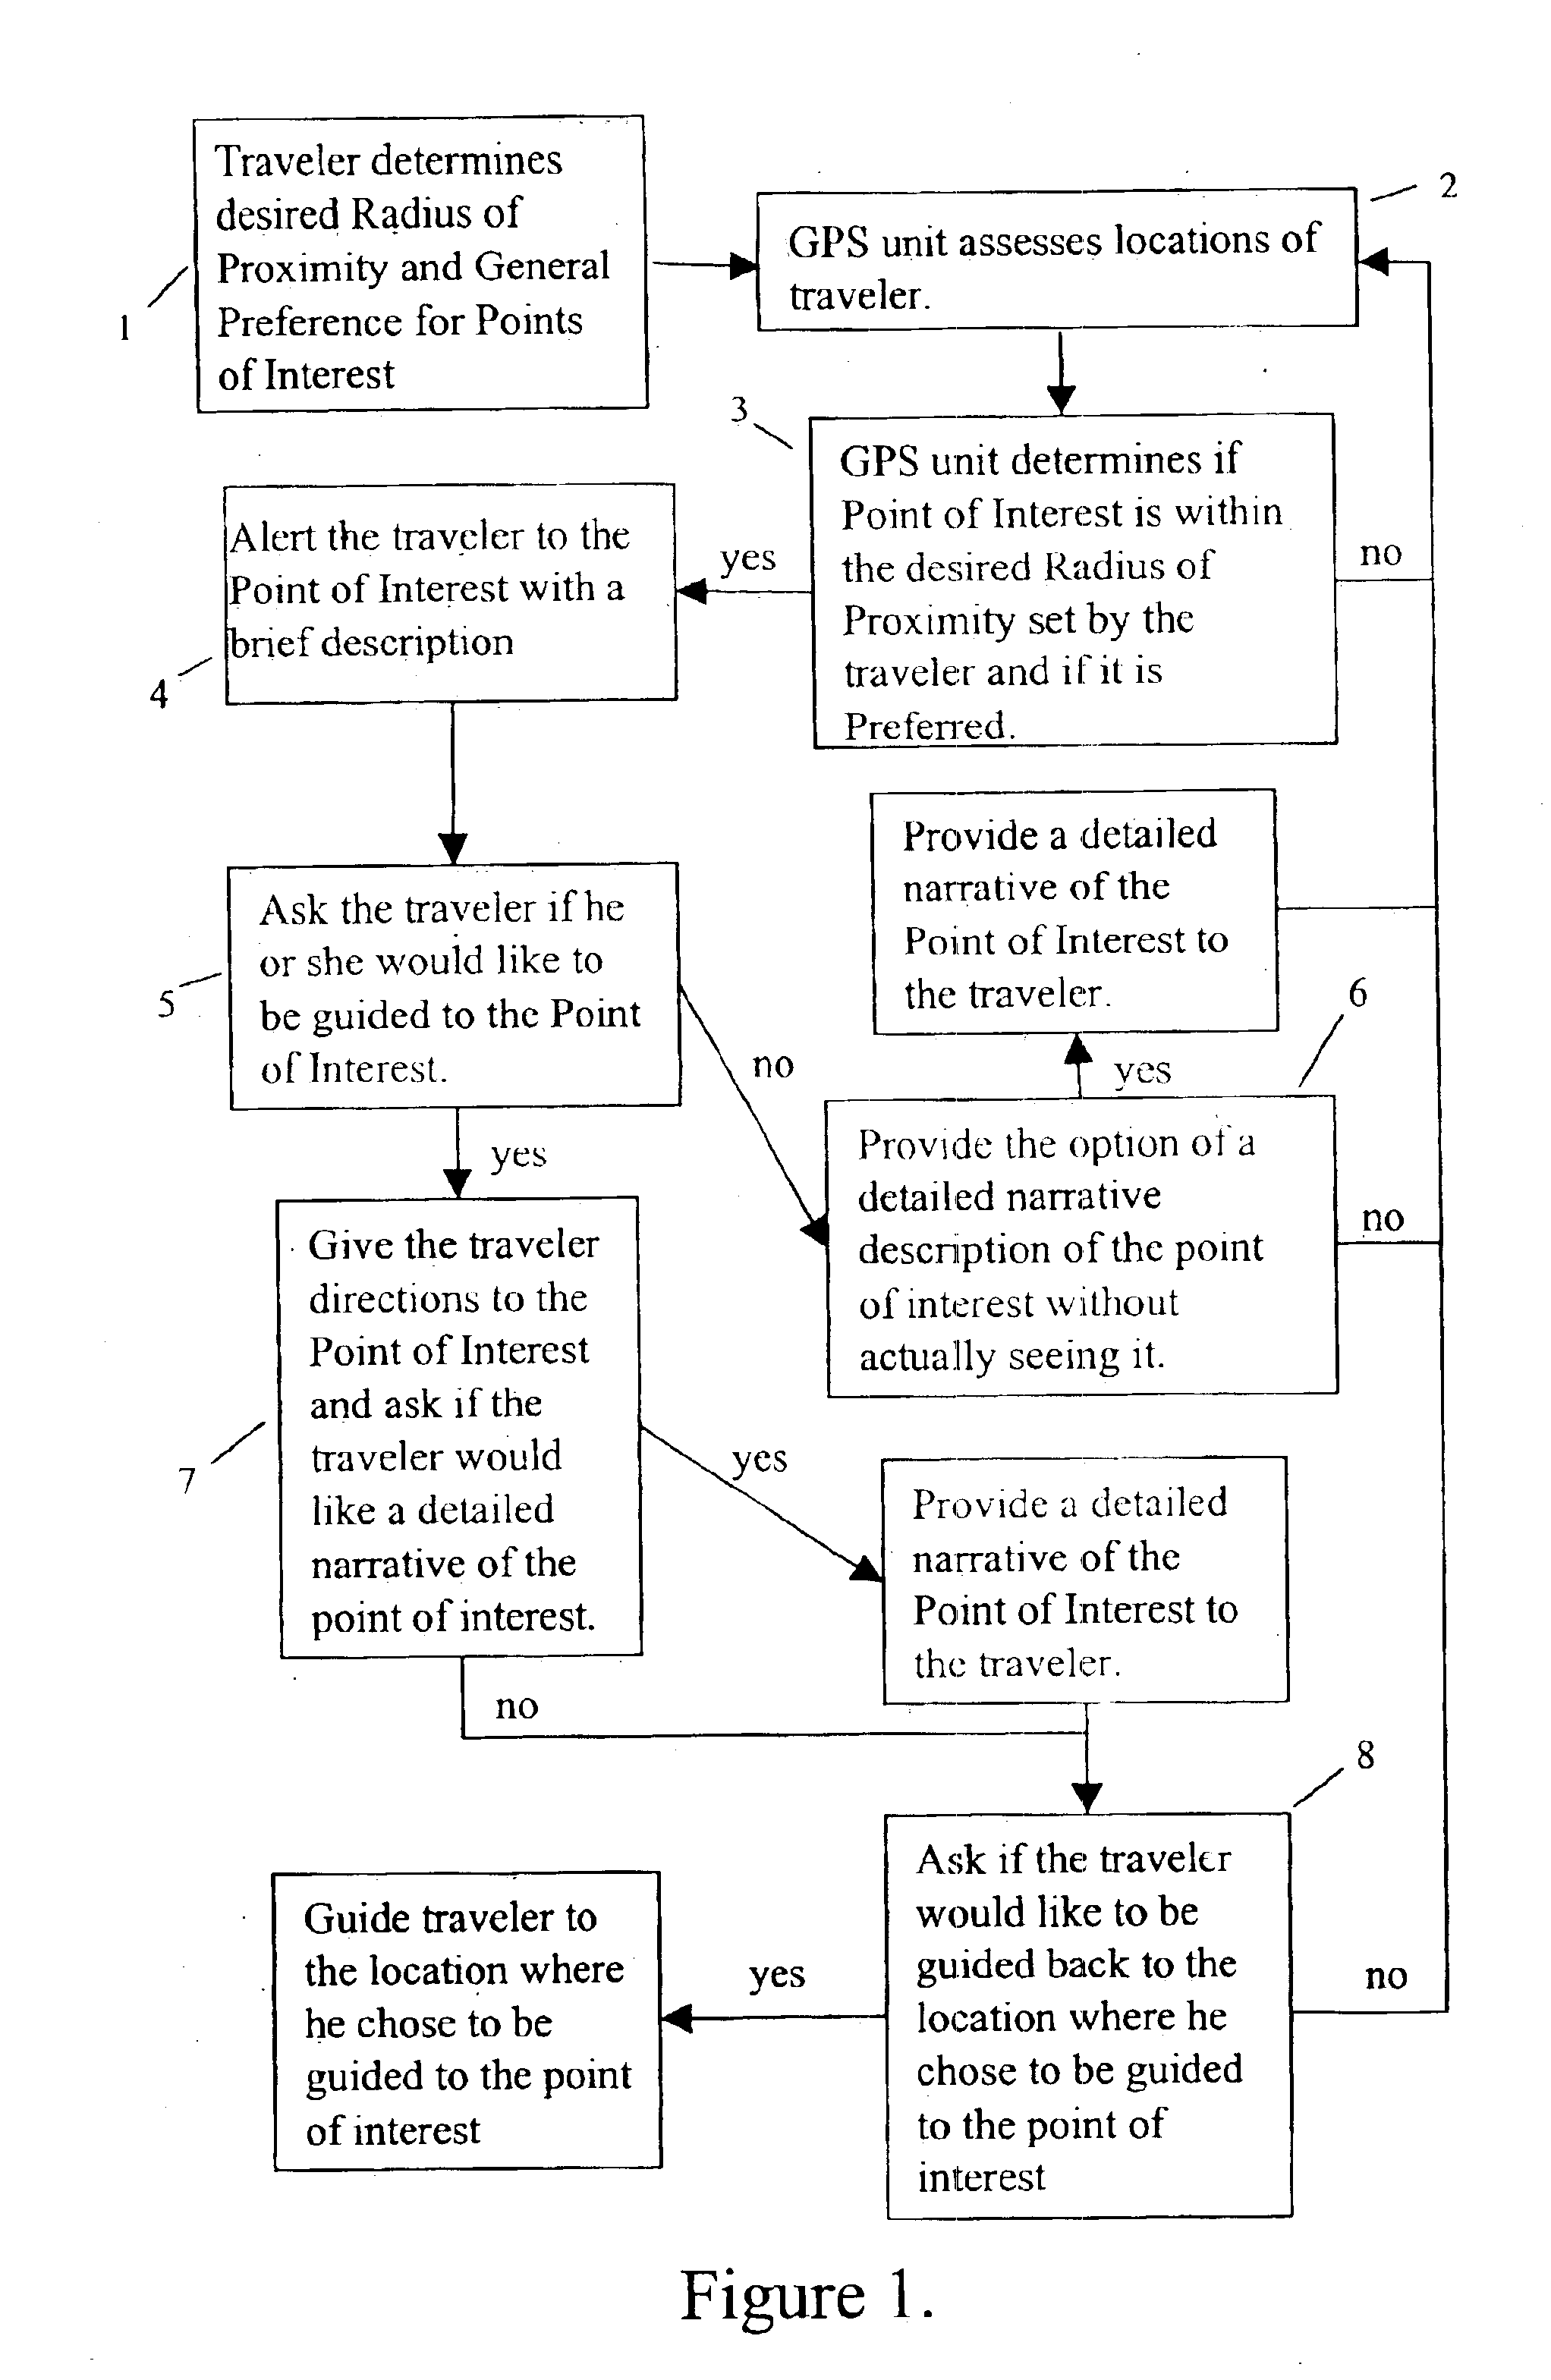 Method and system for providing narrative information to a traveler